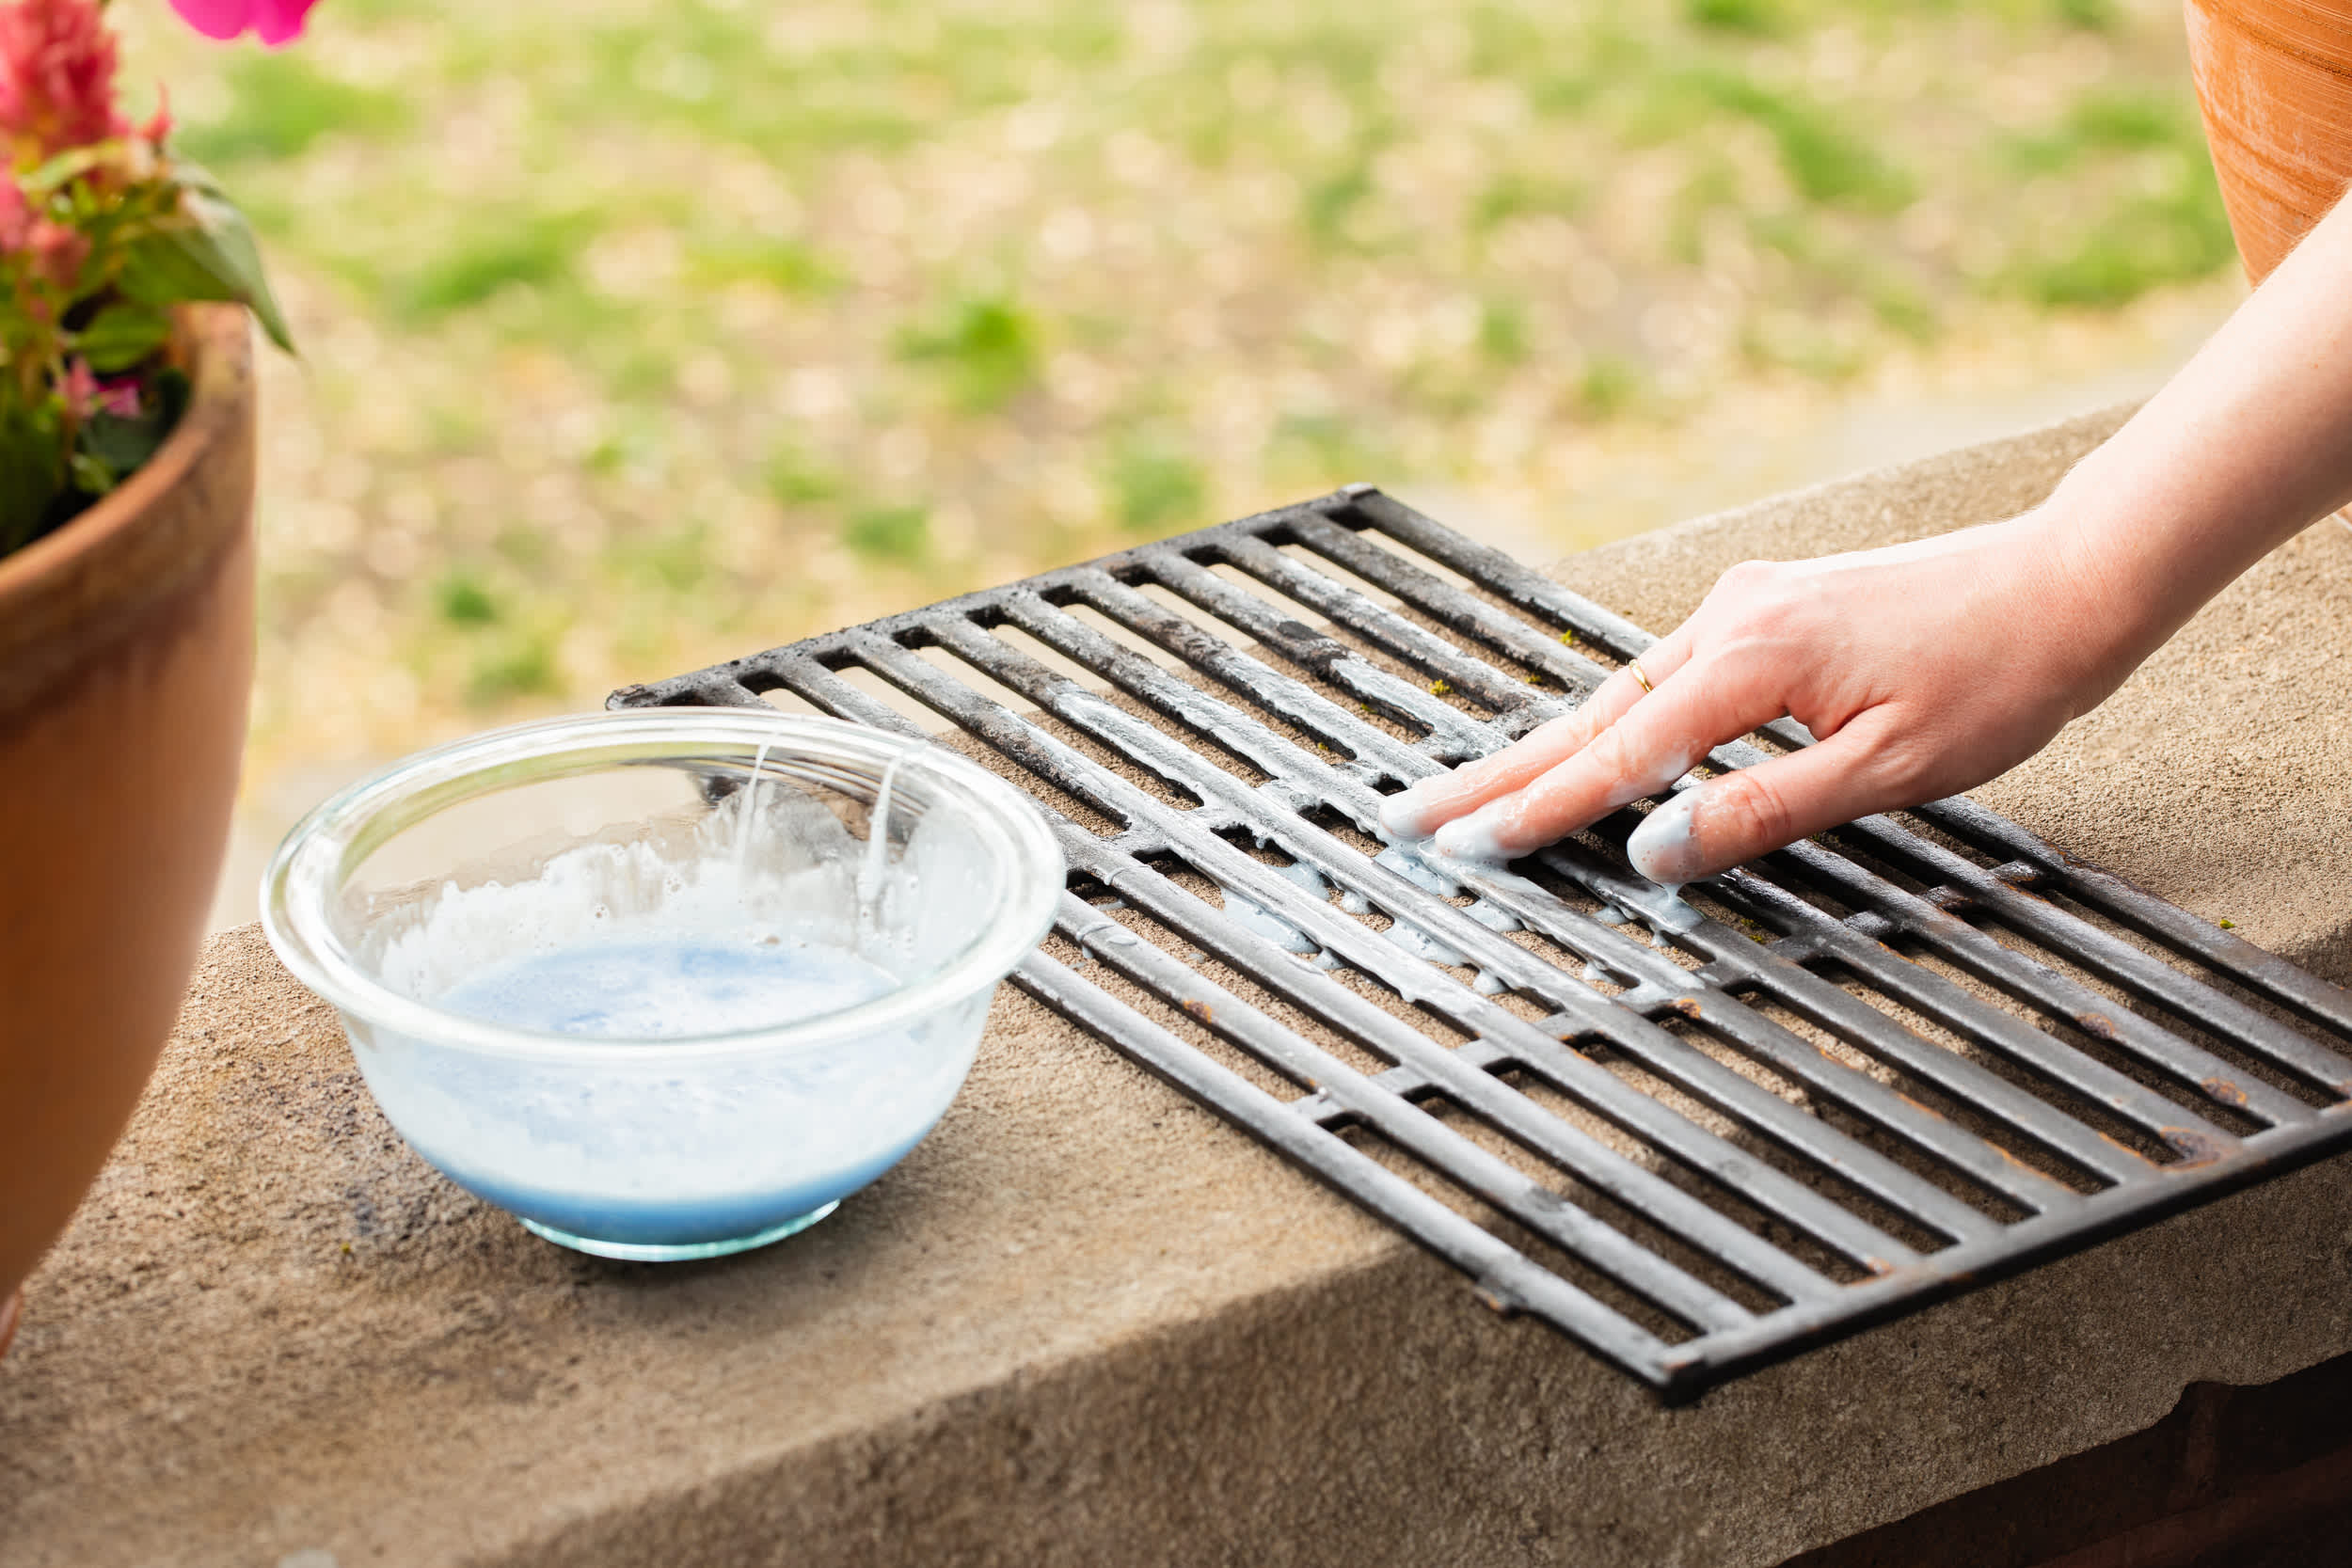 Treat Grill Grates Like Your Teeth